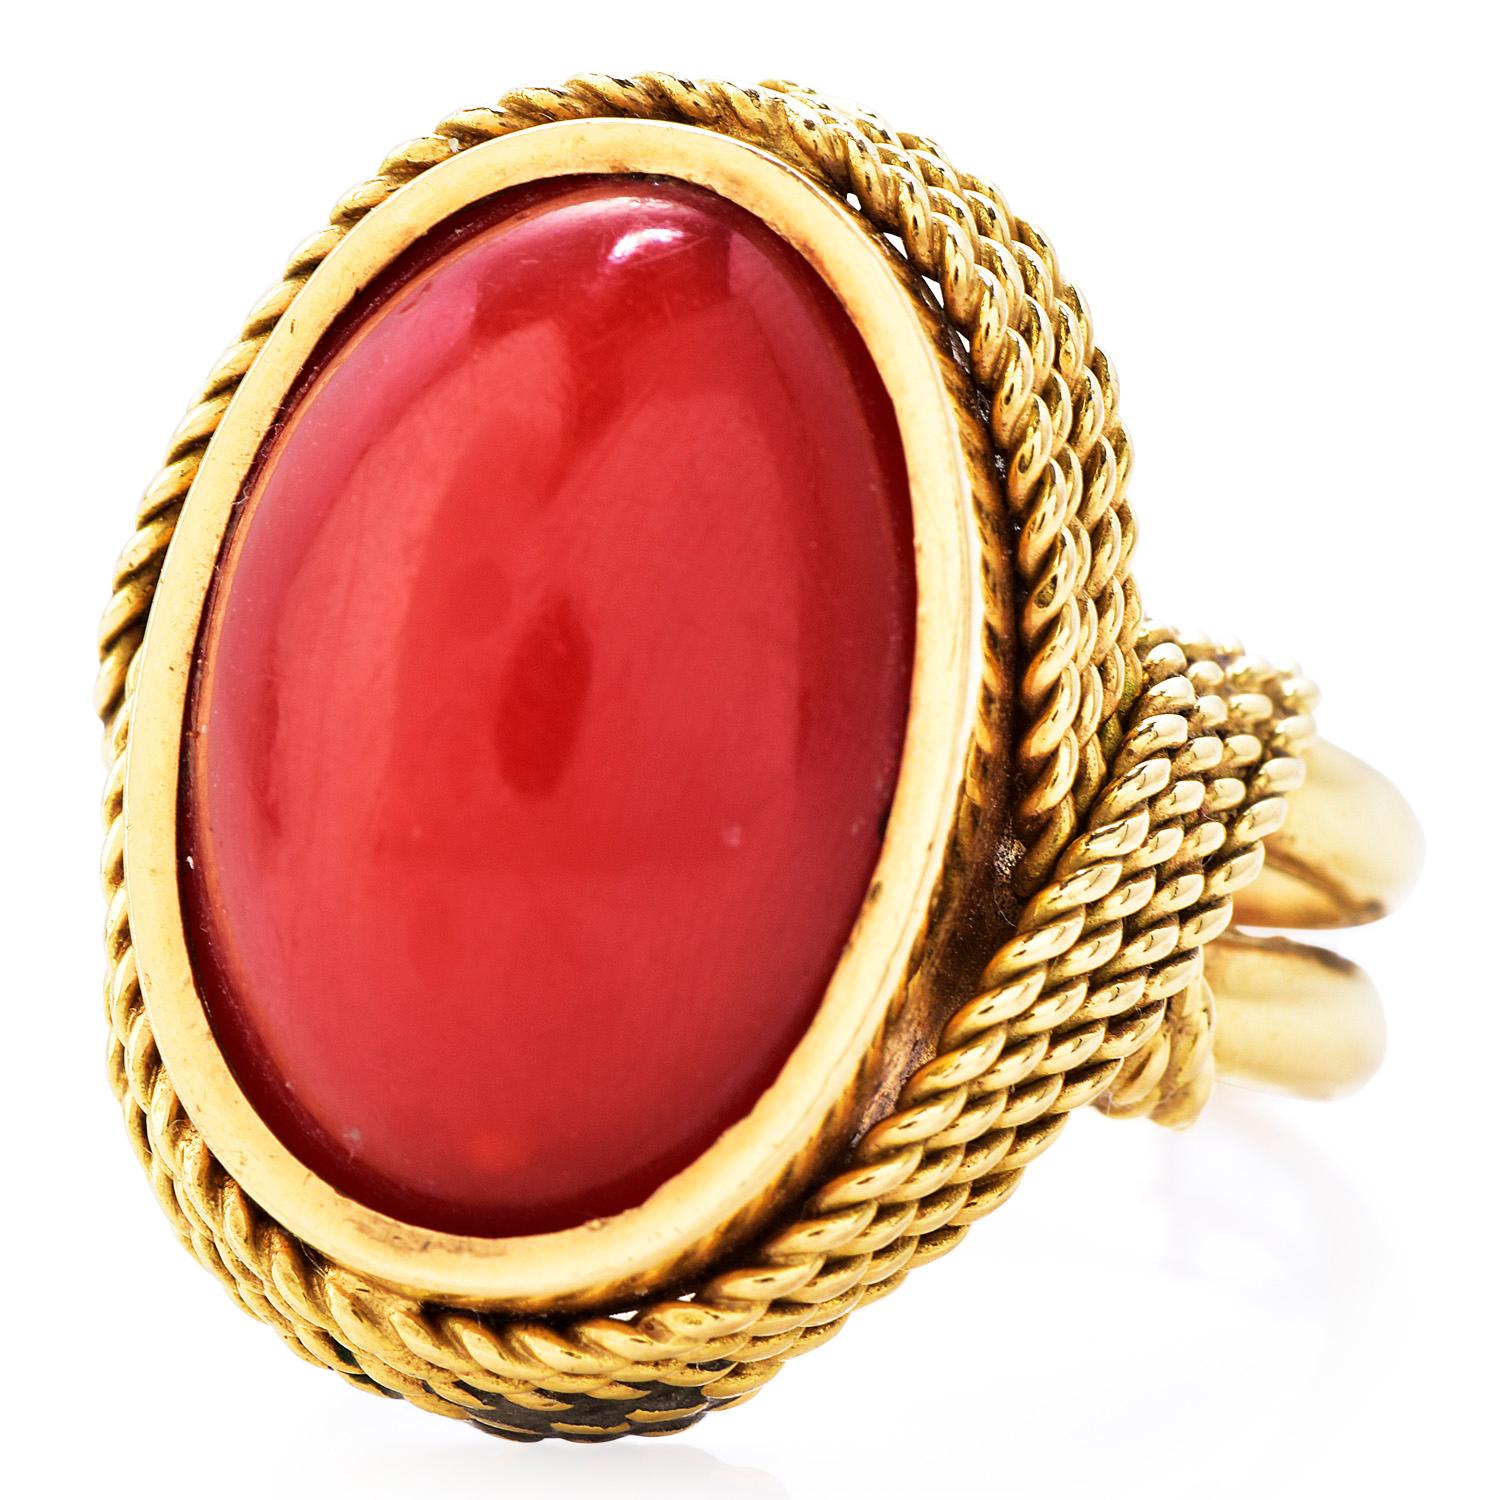 Vintage 1960's Natural Red Coral 18K Gold Vintage Oval Cocktail Ring

This hand-crafted Red Coral 18K Gold Oval Cocktail Ring is the perfect colorful accent for any ensemble weighing 23.5 grams.

Expertly crafted in solid 18K yellow gold, the center